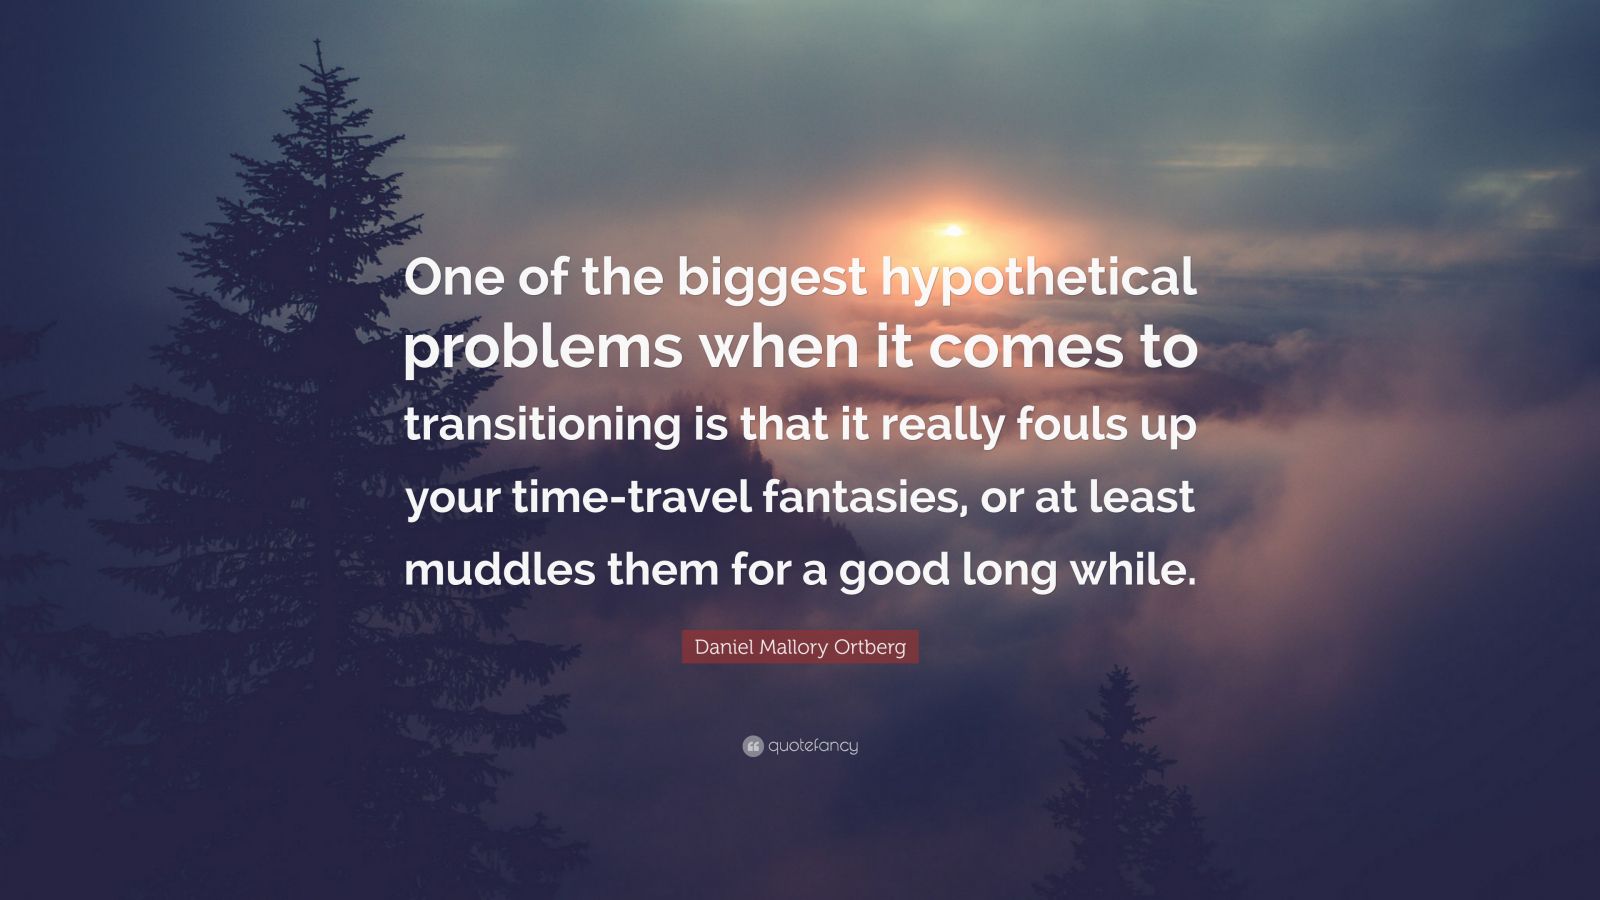 Daniel Mallory Ortberg Quote “one Of The Biggest Hypothetical Problems When It Comes To 